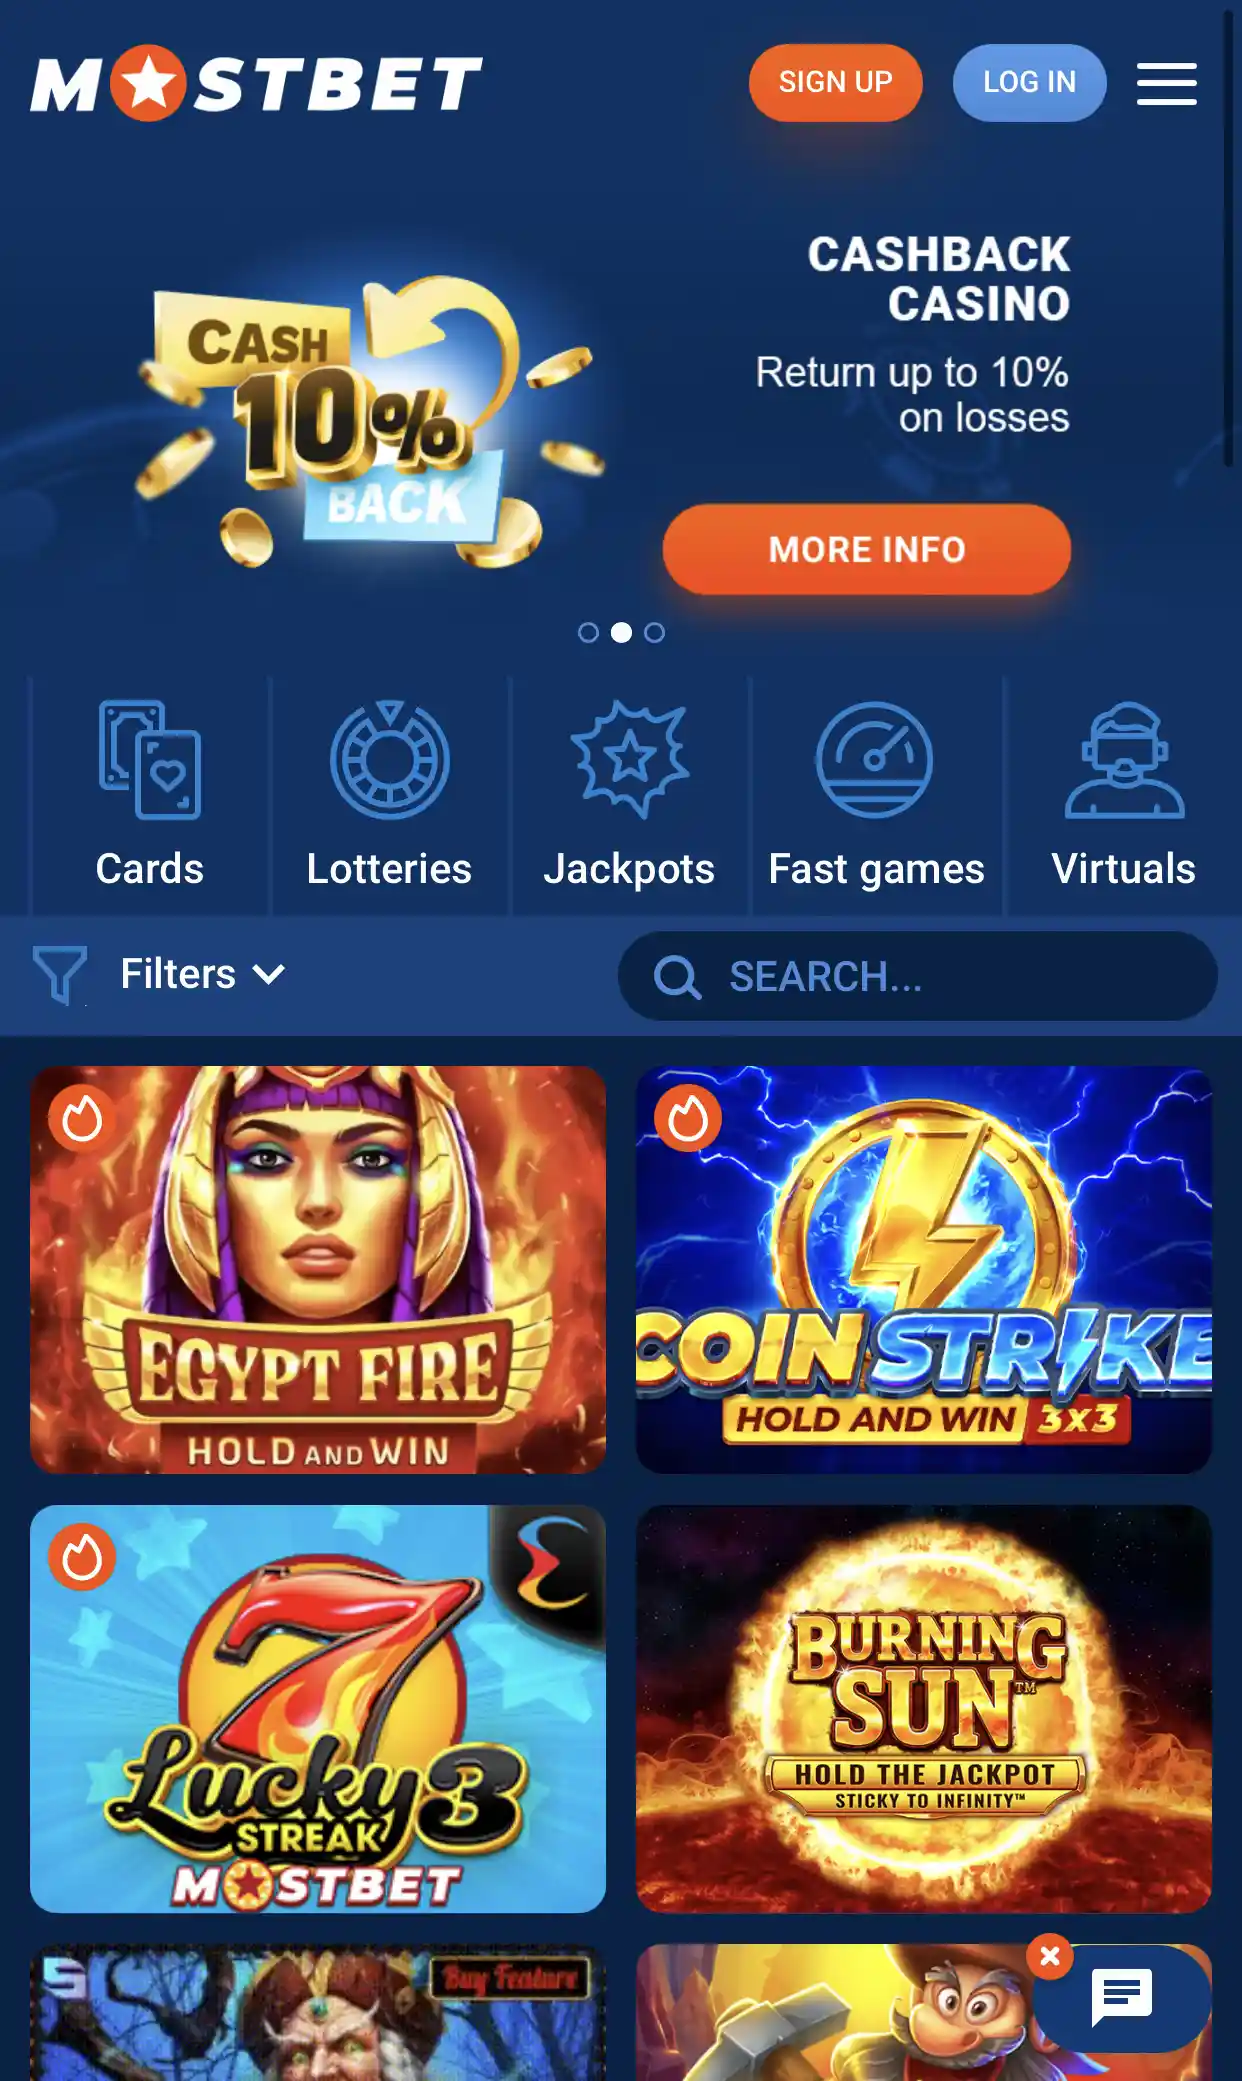 Use the filters to search for casino games.